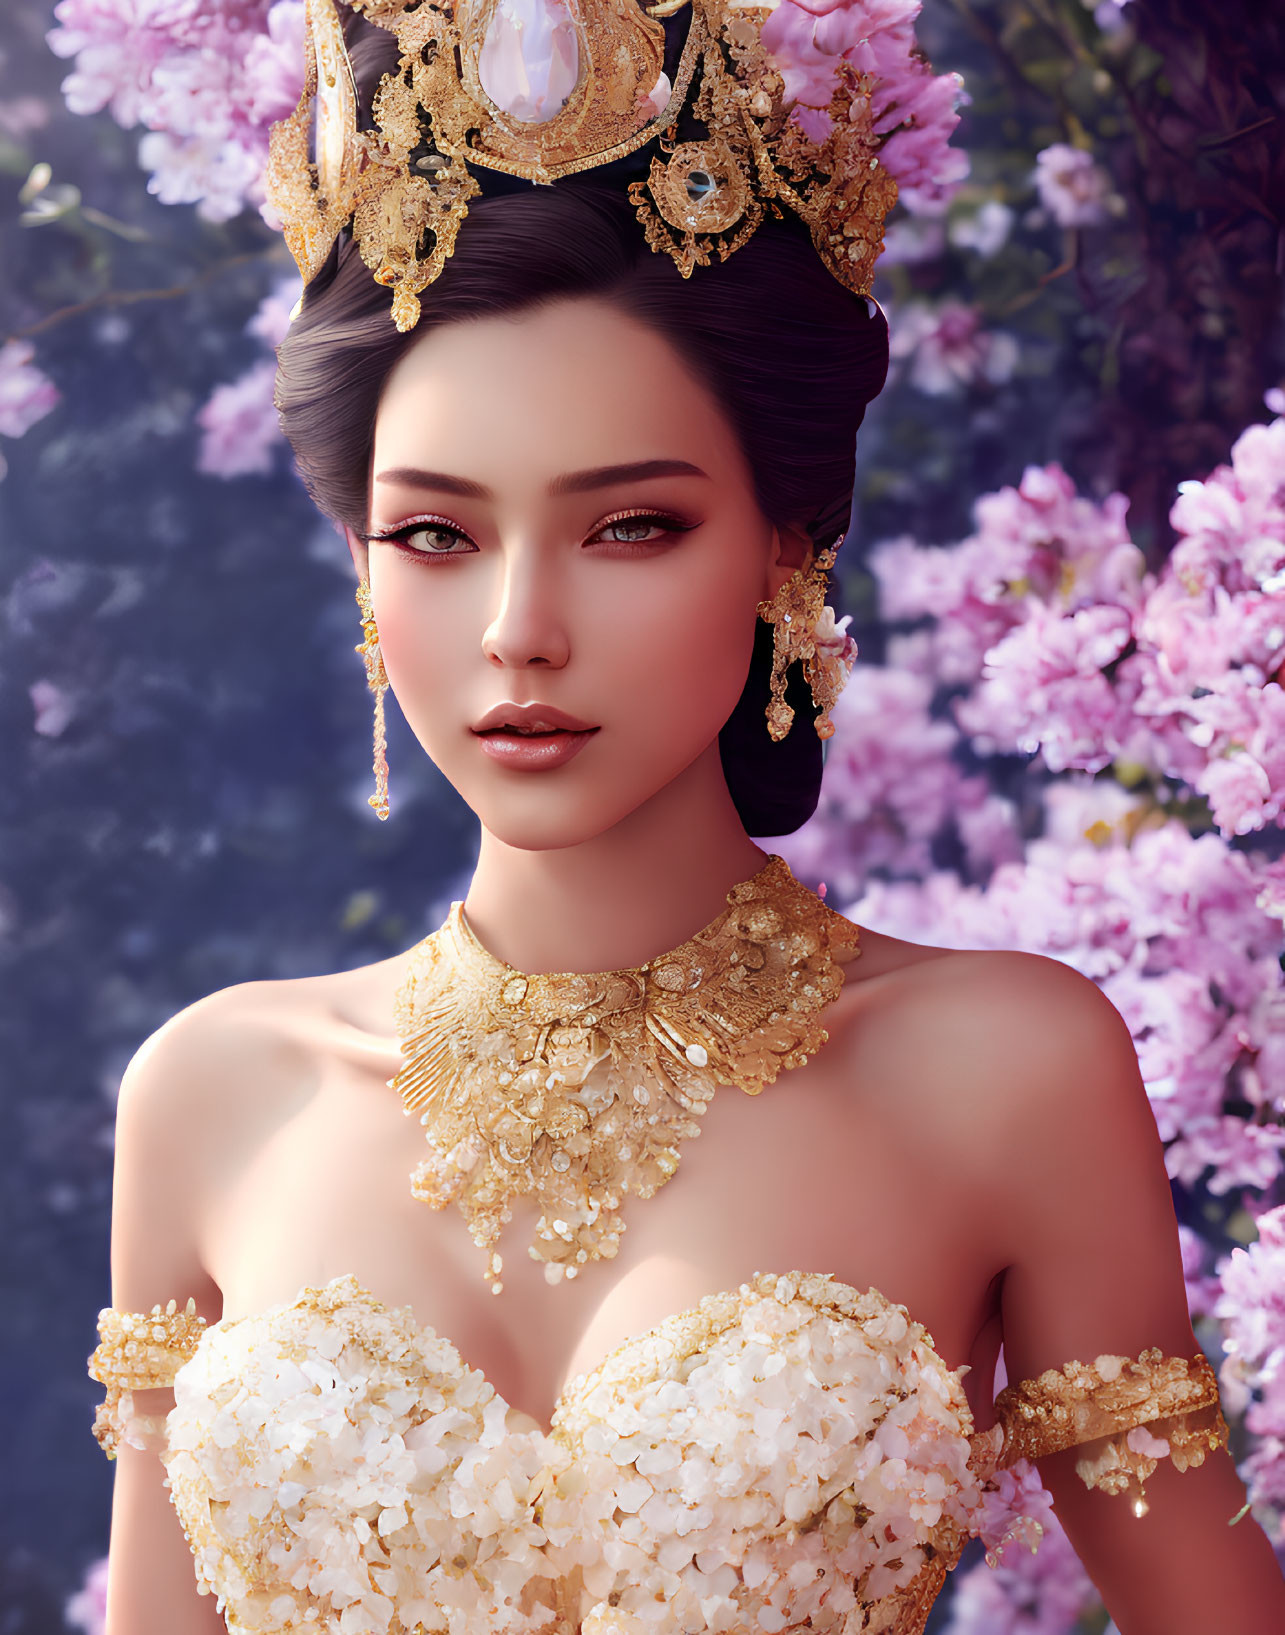 Digital Artwork: Woman in Golden Crown and Jewelry with Pink Blossoms